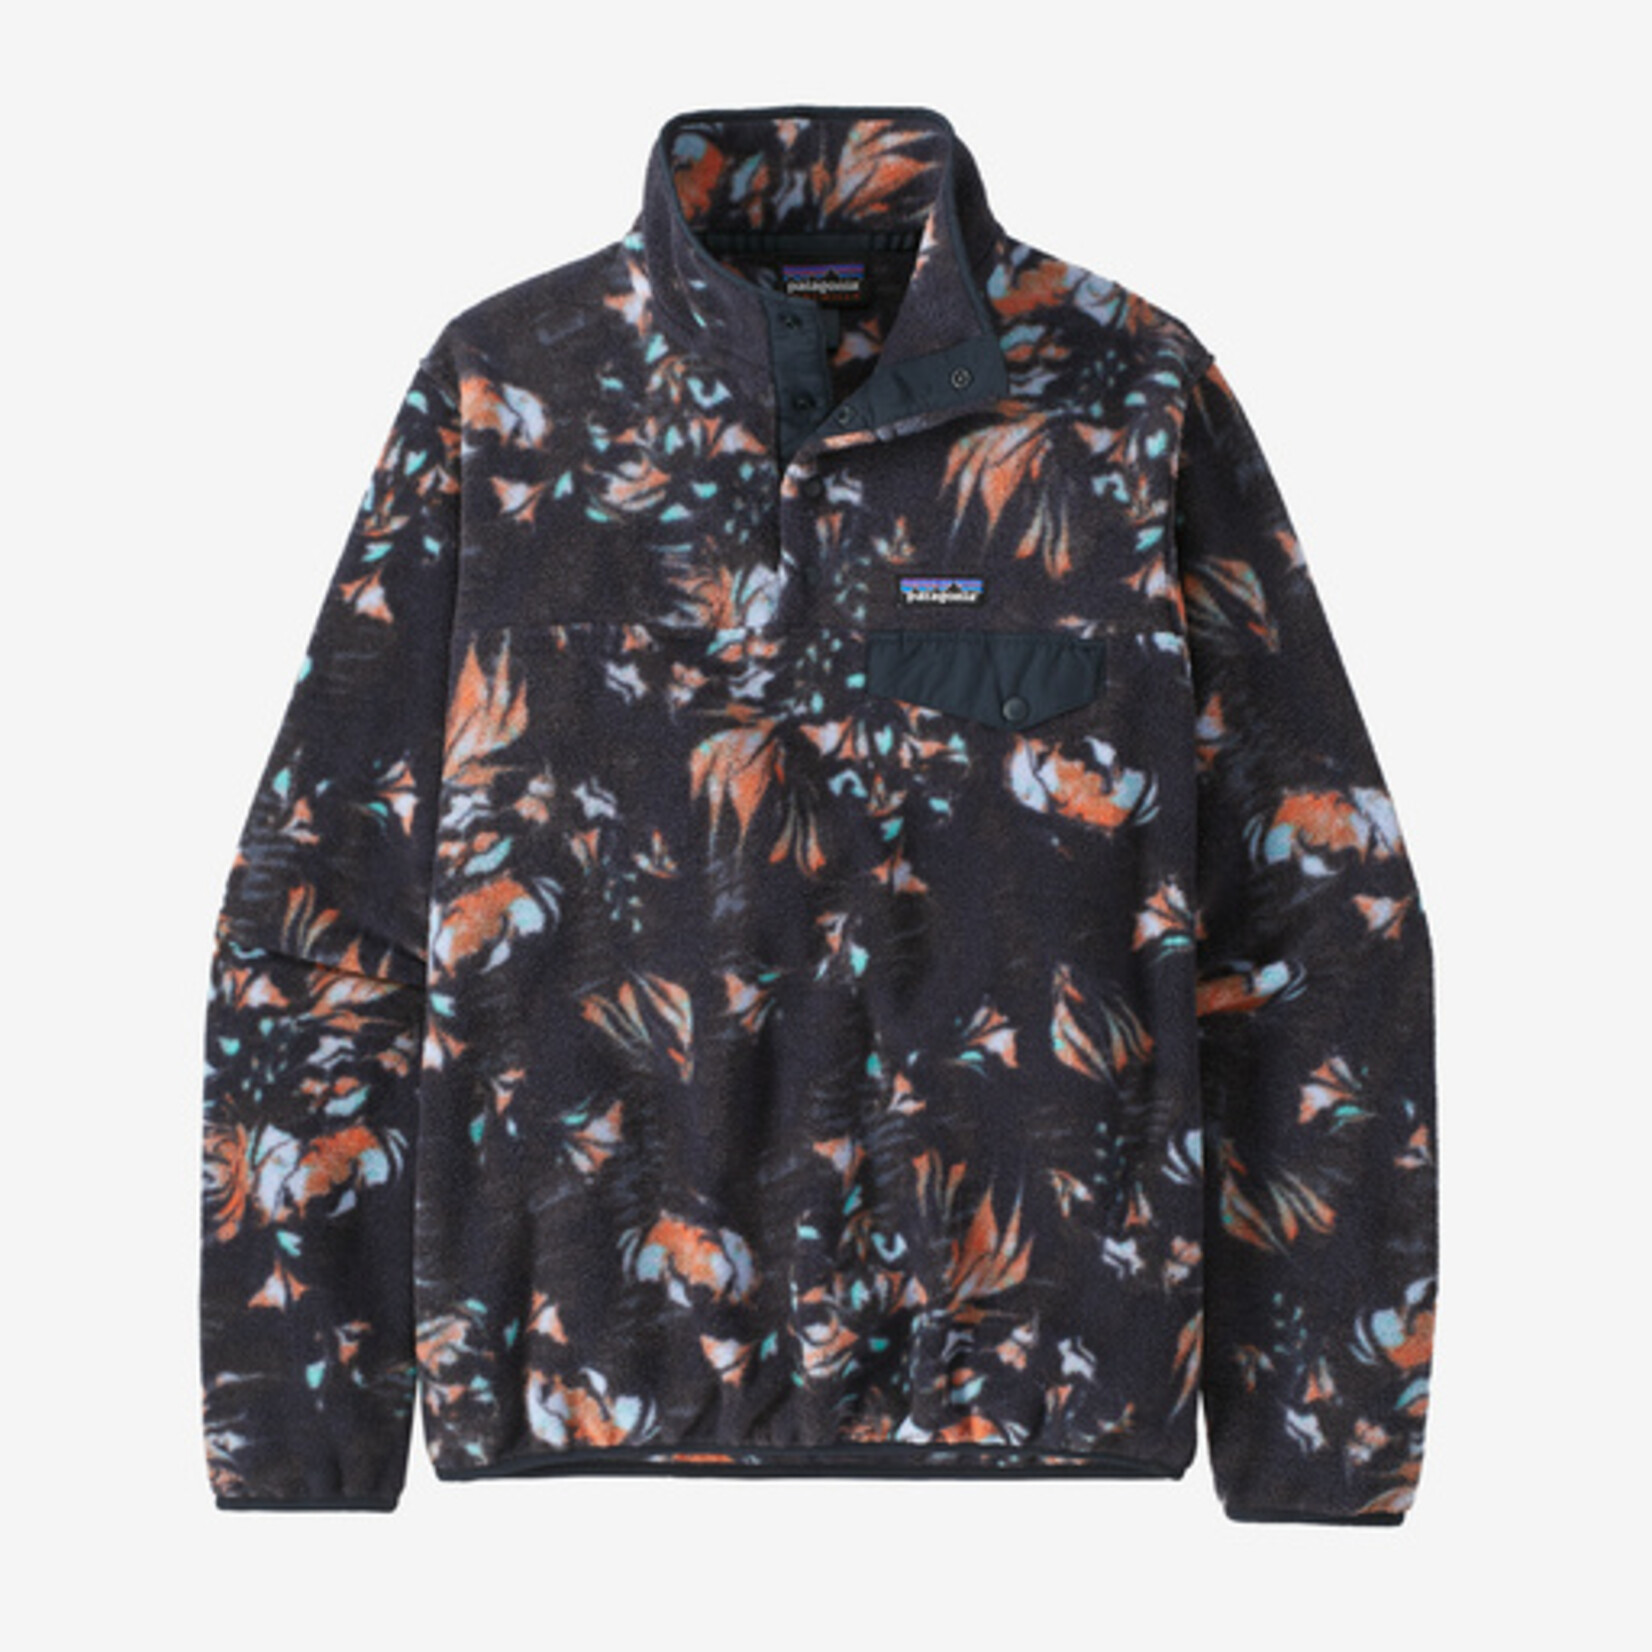 Patagonia W’s LW synch snap-t